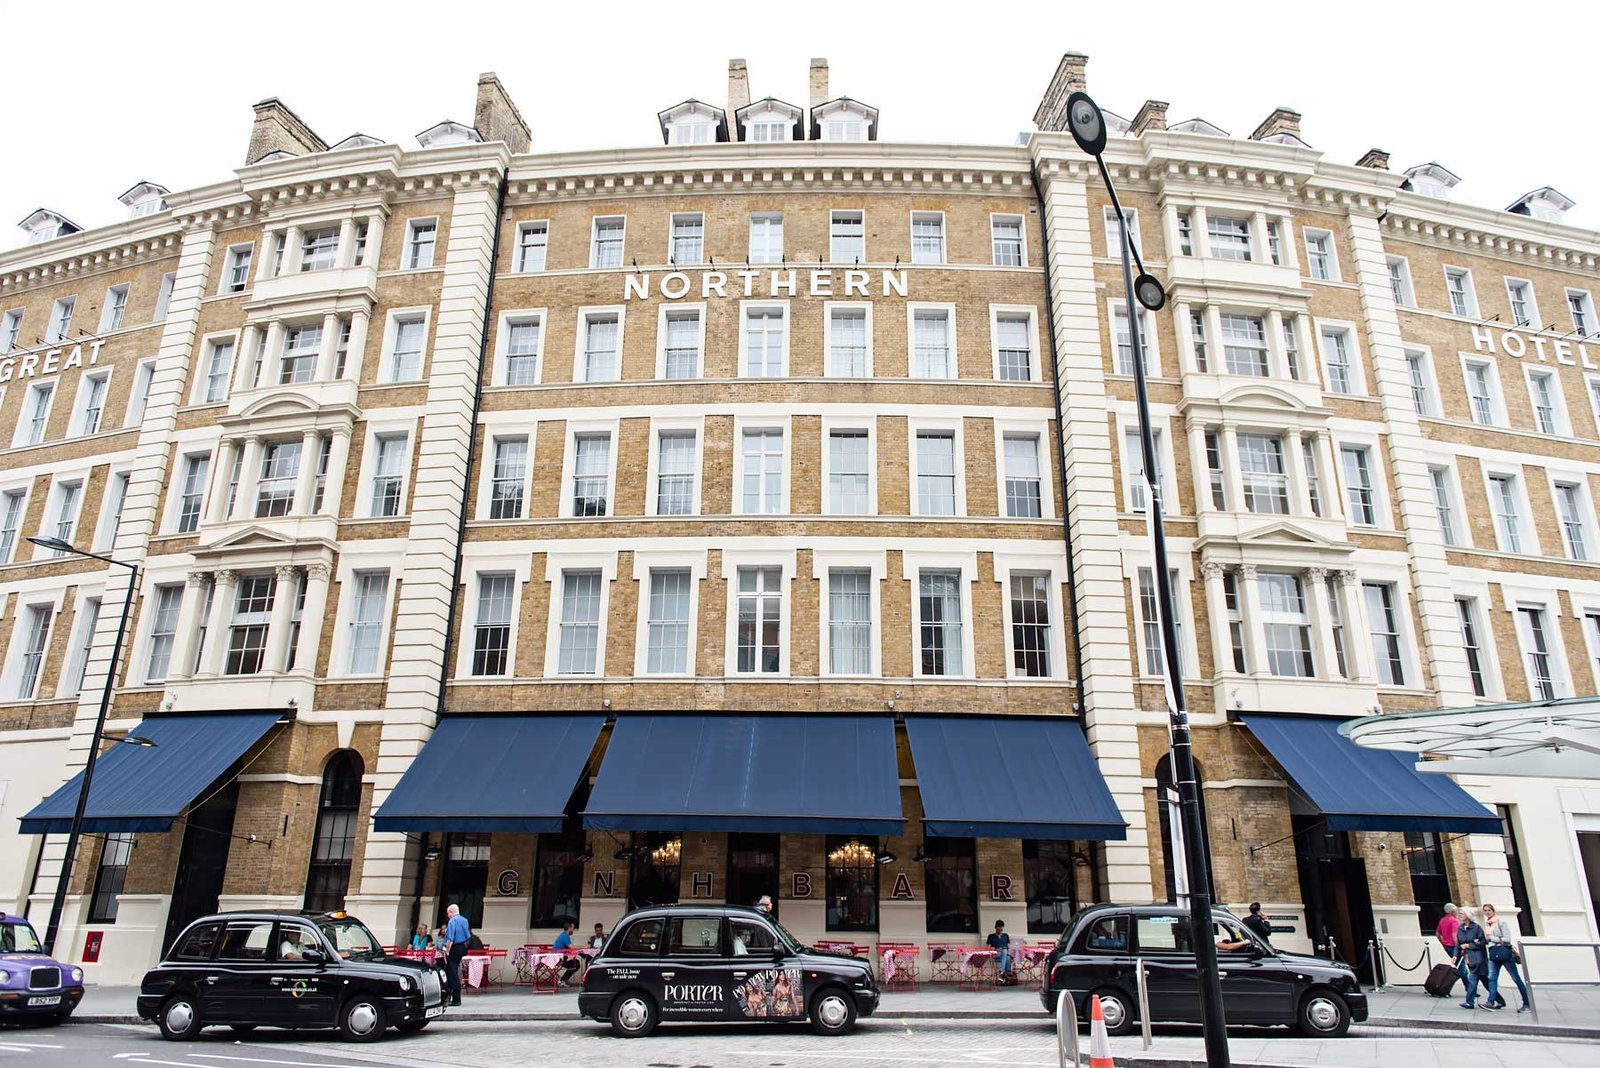 Luxury Boutique Hotel in London - Great Northern Hotel | Review on Urban Pixxels